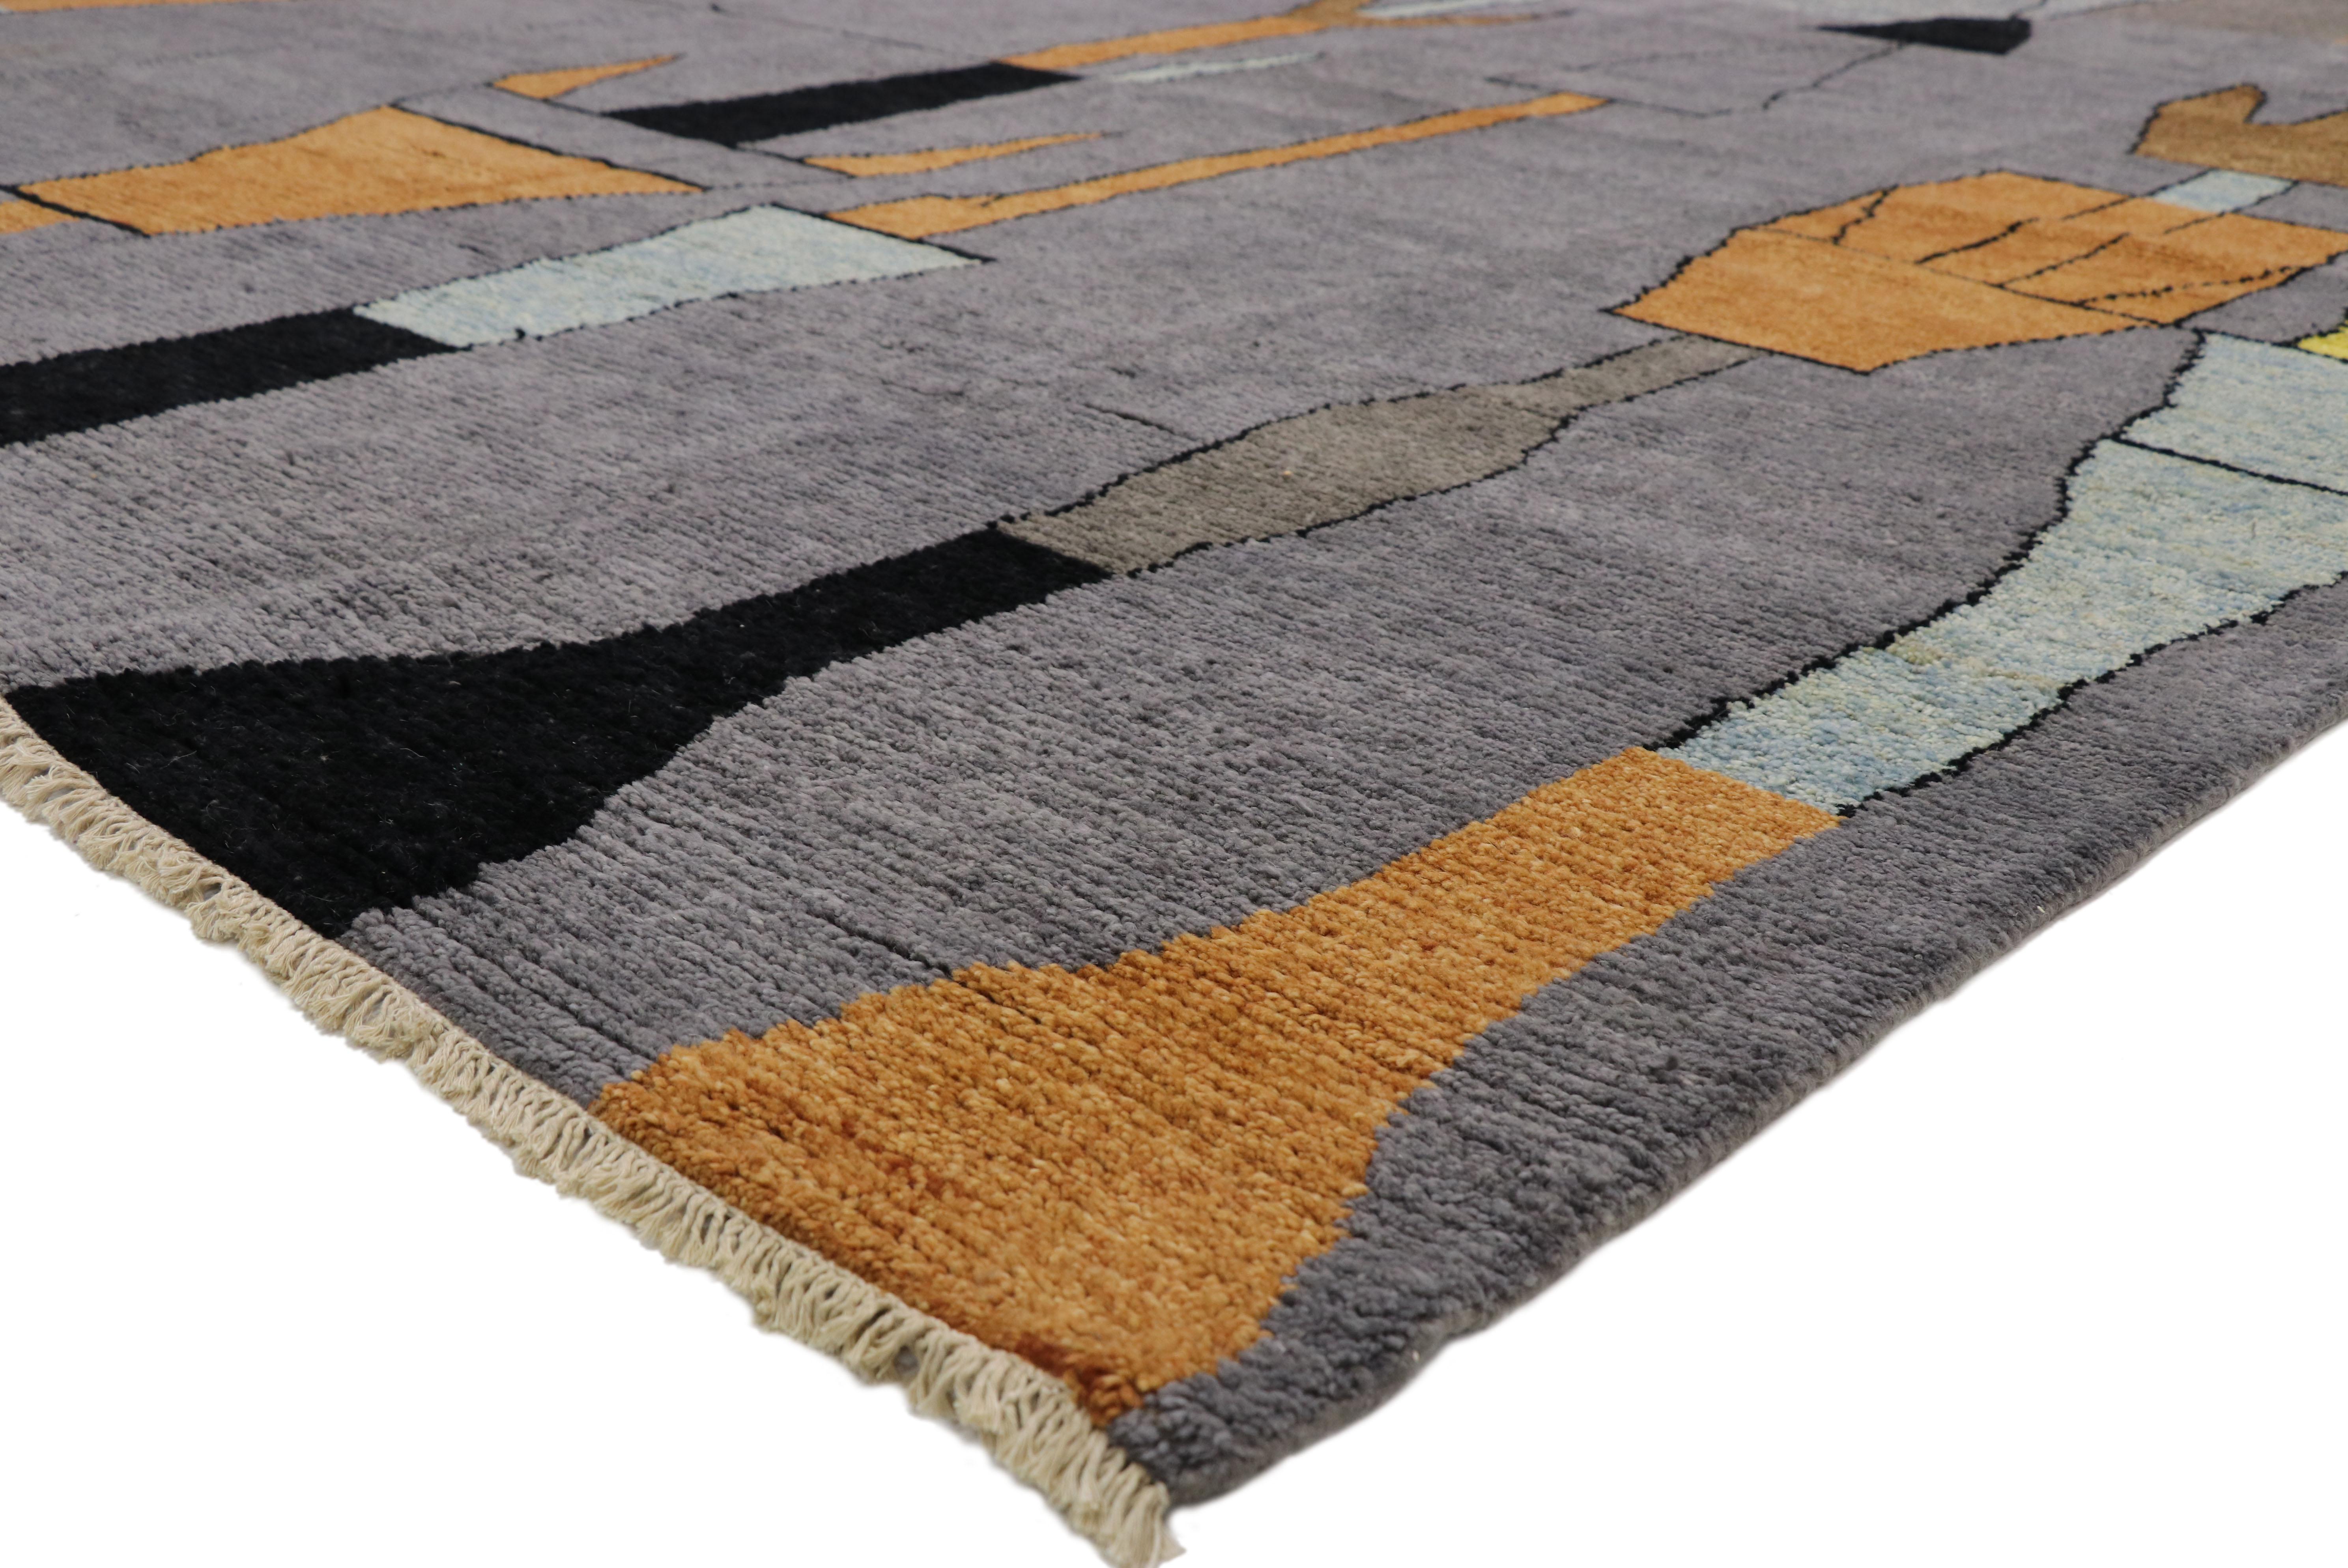 80533, new abstract cubism contemporary Moroccan style rug inspired by Paul Klee 09'11 x 13'07. Bold, pastel, dark and light hues of the colors woven into this hand knotted wool contemporary Moroccan rug work together to create a truly unique look.